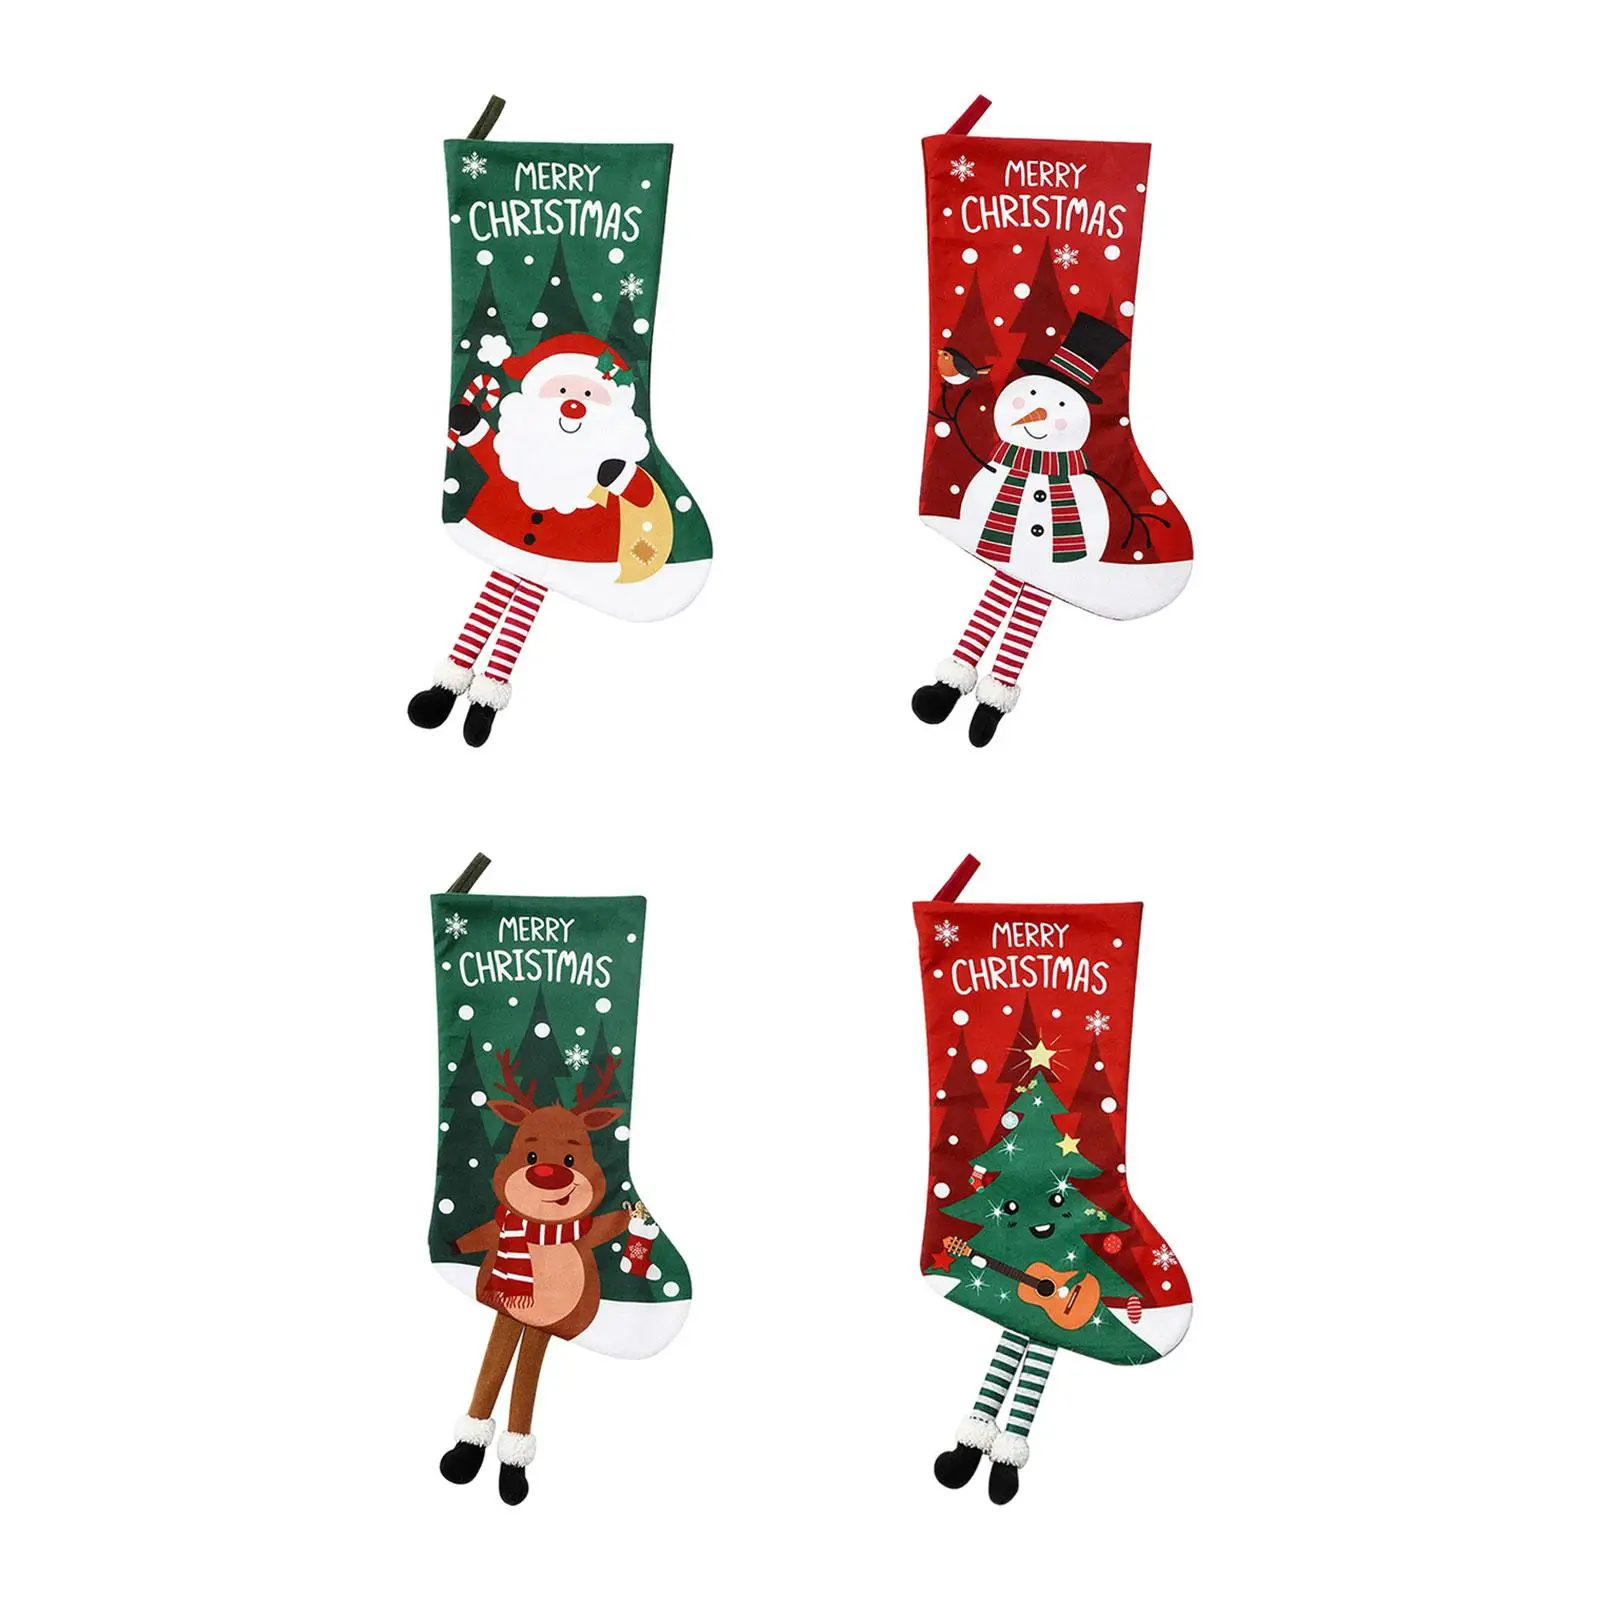 Christmas Stockings Gift Bag Christmas Tree Decoration, Party Supplies Sock Decoration Xmas Socks for Holiday Party Fireplace